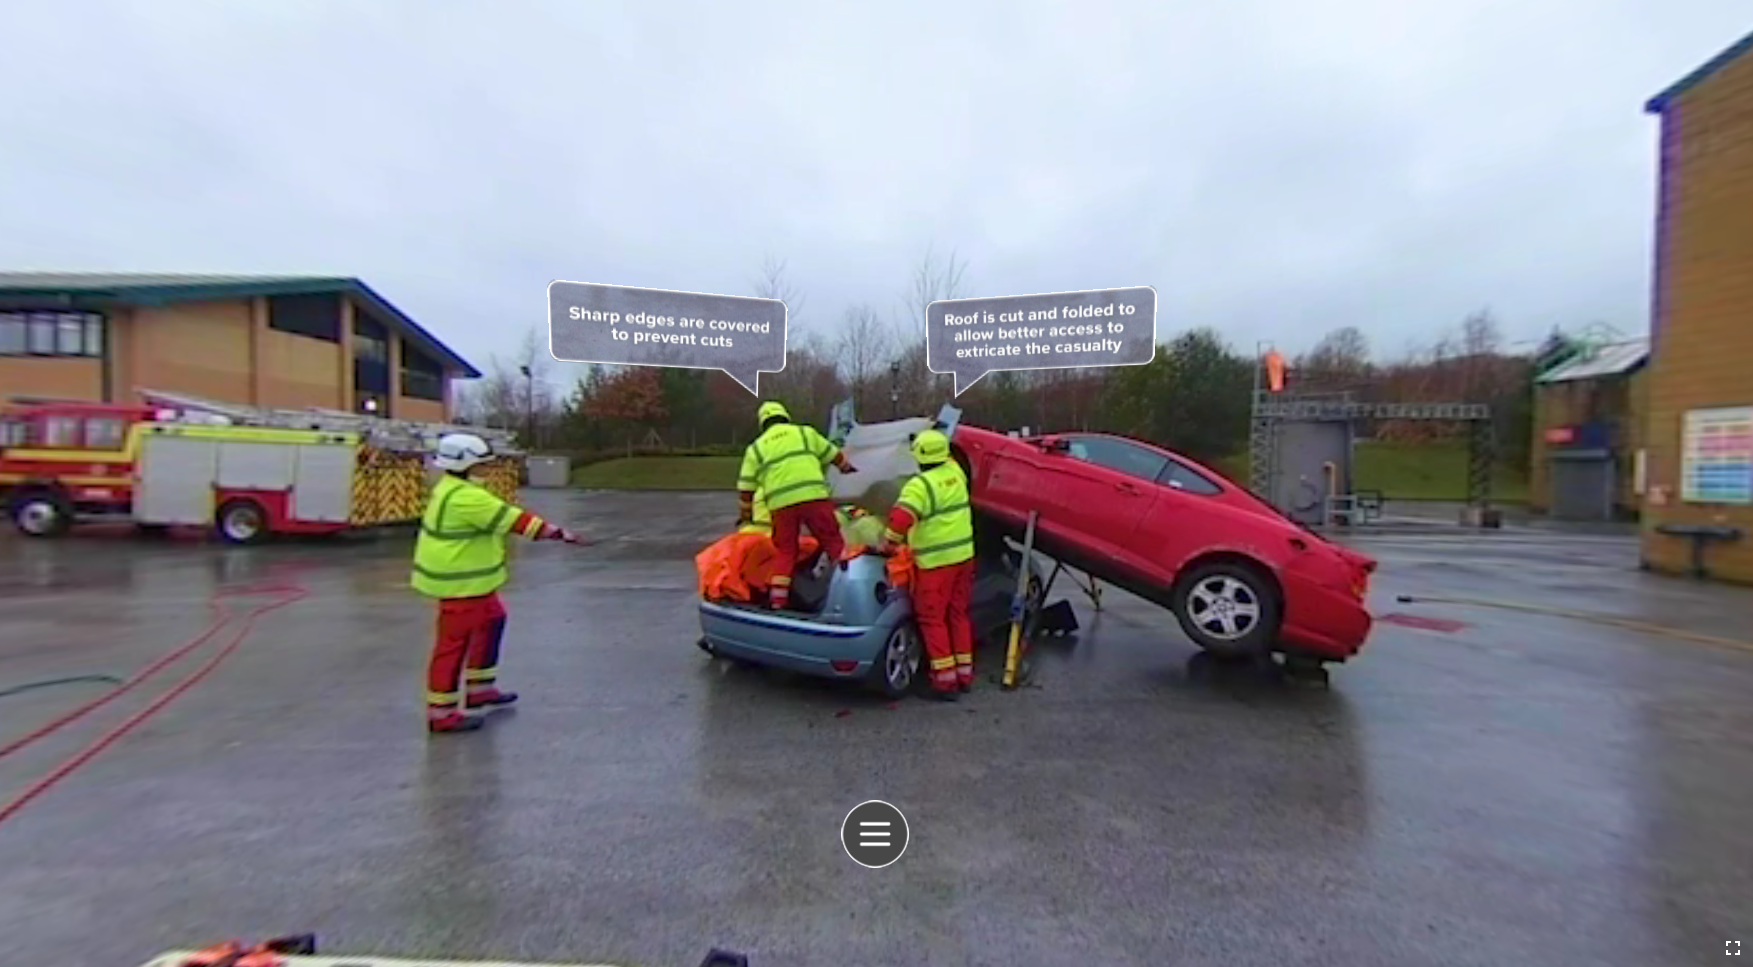 Image from the immersive training, where firefighters respond to the scene of a collision, where they extract and rescue a victim.